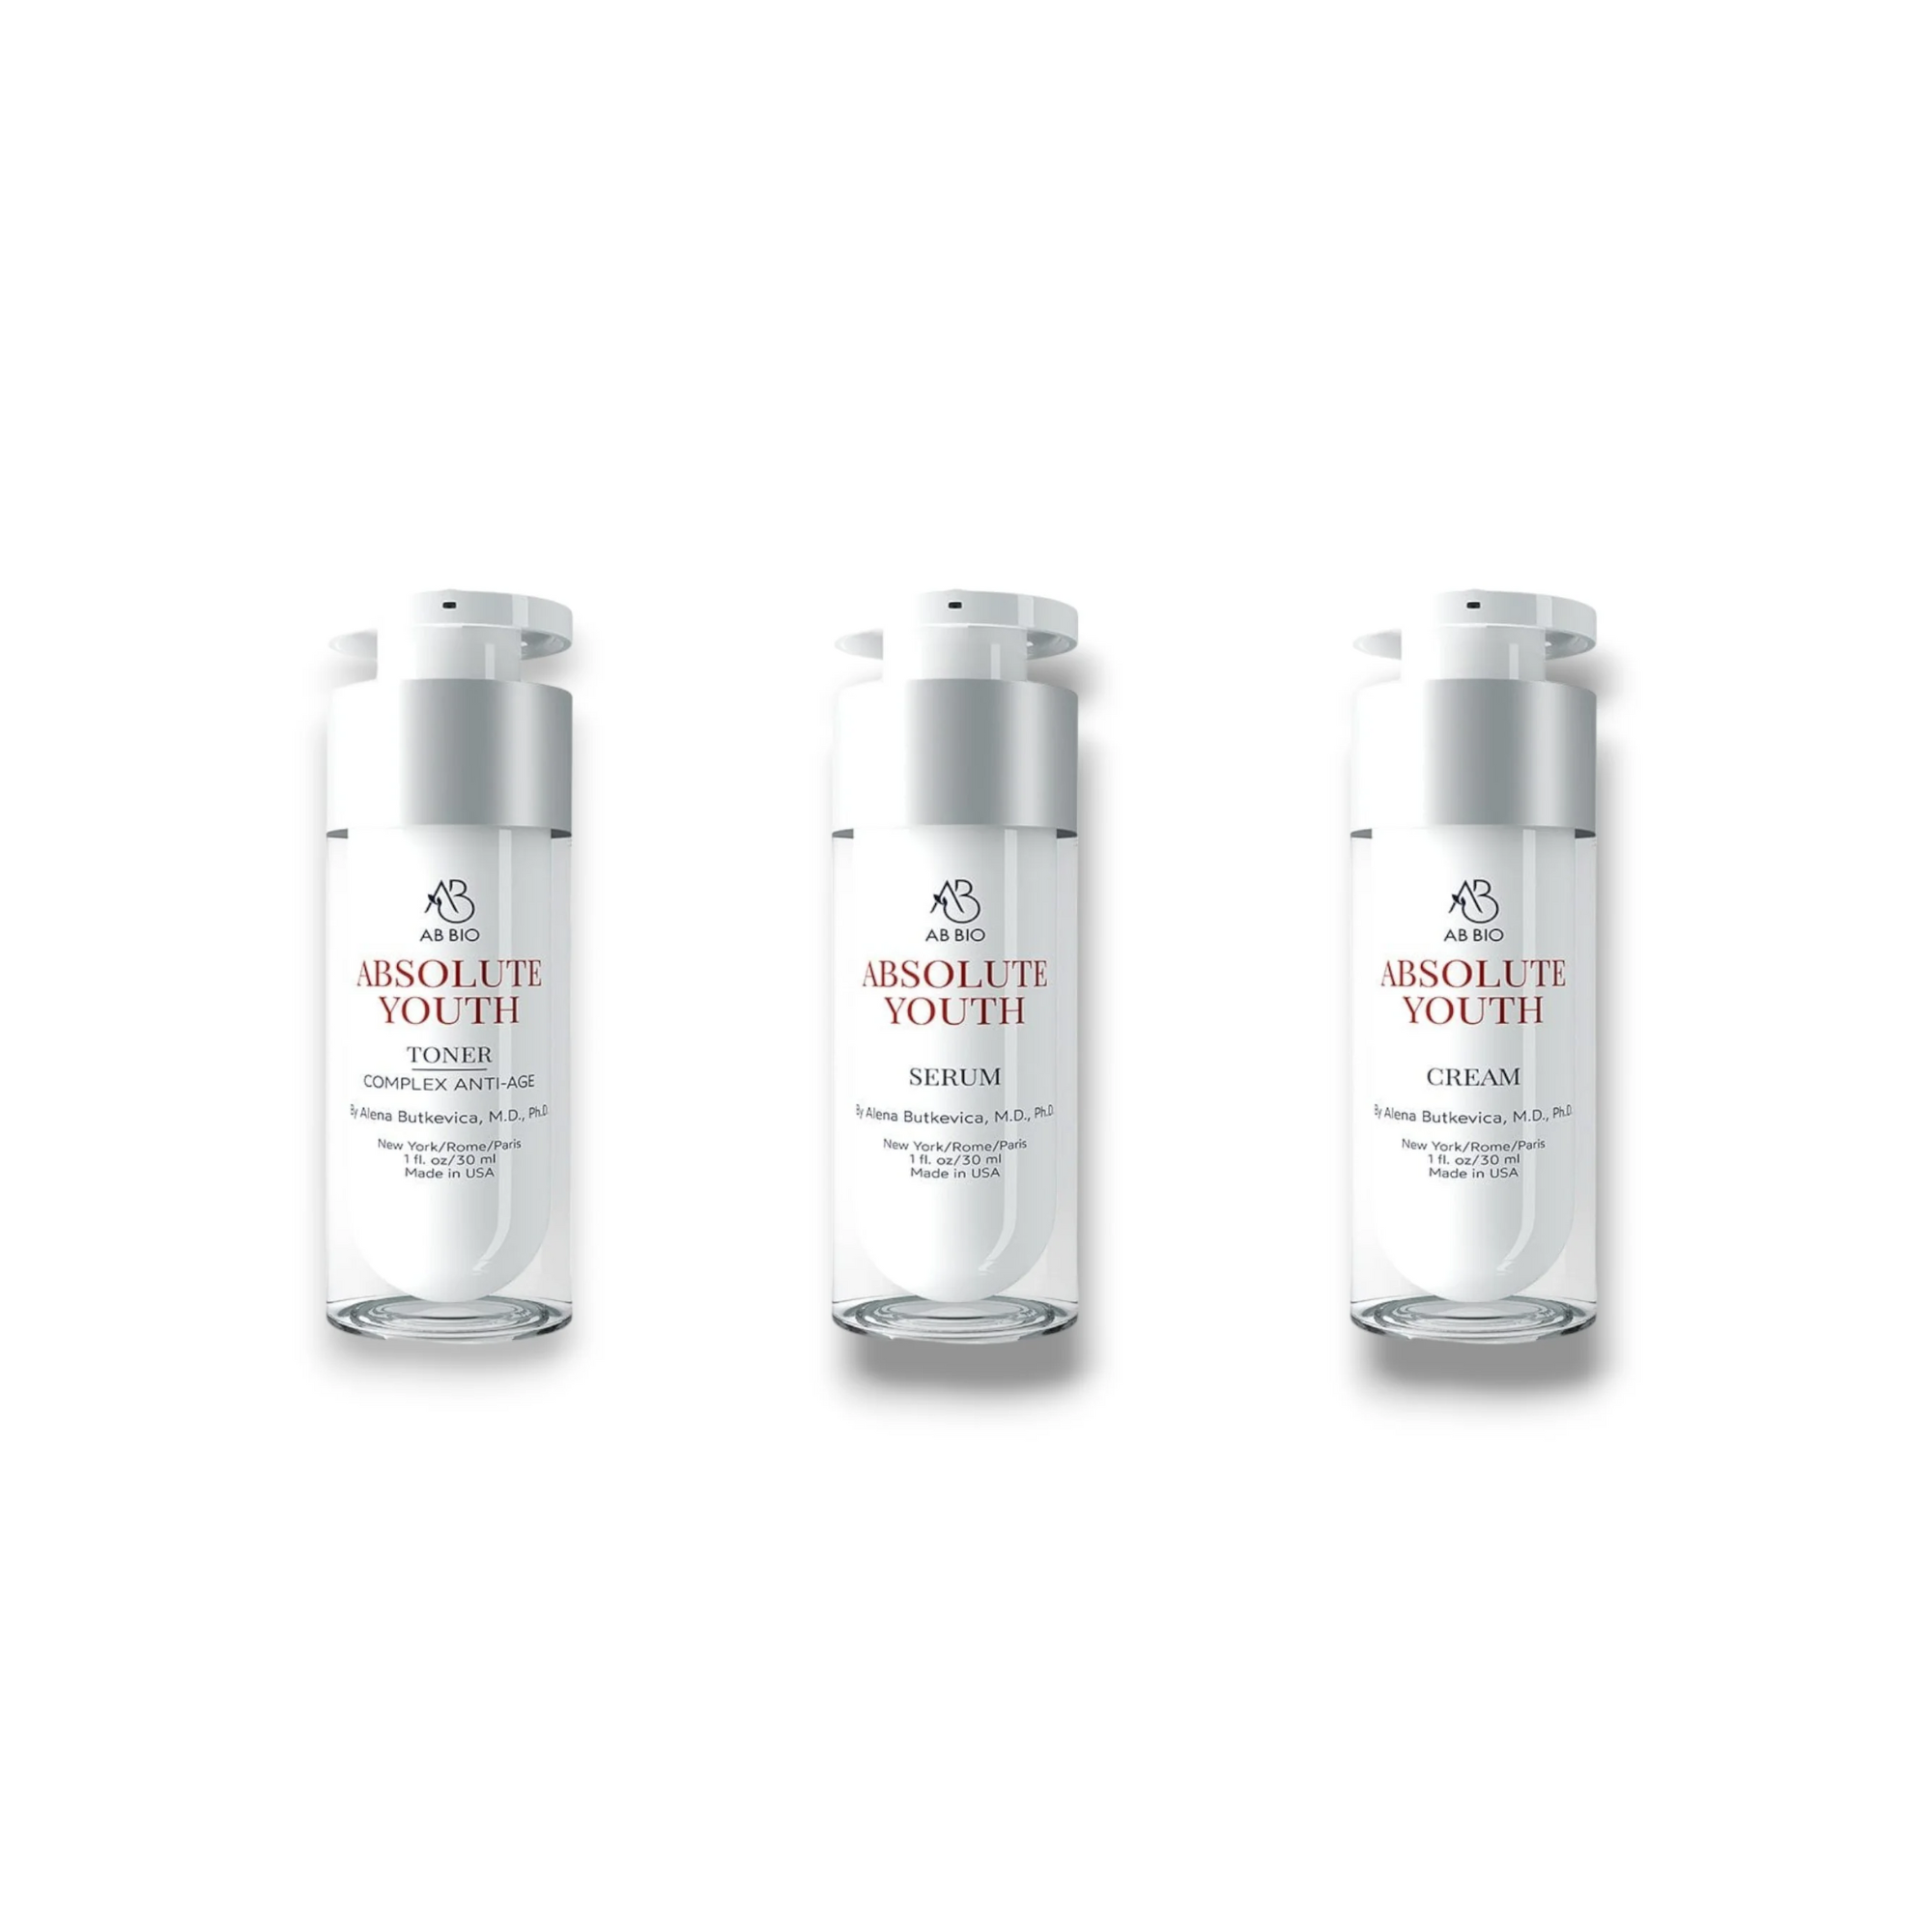 All-in-One TRIO Anti-Aging Treatment for Women